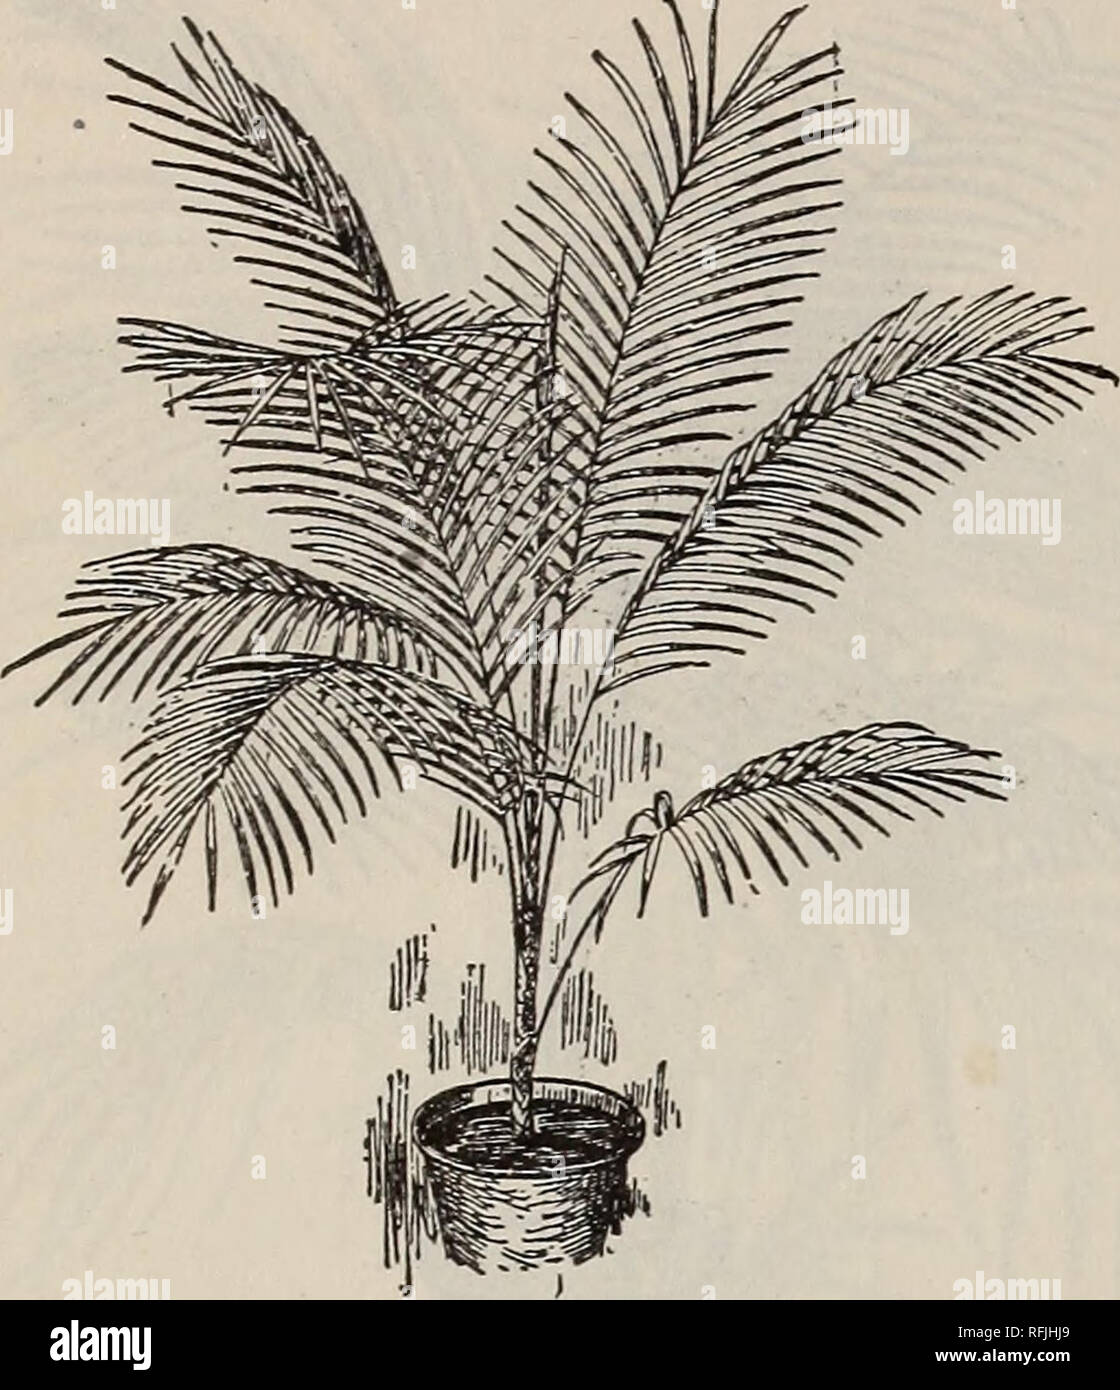 . High grade 1899 bulbs &amp; seeds for fall planting. Nursery stock New York (State) New York Catalogs; Flowers Catalogs; Bulbs (Plants) Catalogs; Plants, Ornamental Catalogs; Gardening Equipment and supplies Catalogs. 30 STUMPP &amp; WALTER CO.'S BULB CATALOGUE. PALMS AND DECORATIVE PLANTS-Continued. Cocos Weddeliana. Plumosus Nanus (Climbing Lace Fern.) Bright green leaves, gracefully arched, and as finely woven as silken mesh, retaining their fresh- ness for weeks when cut. 30c. each, $3.00 per doz. Tenuissimus. Very fine filmy foliage. A hand-ome climbing plant for the win- dow. 15c. each Stock Photo